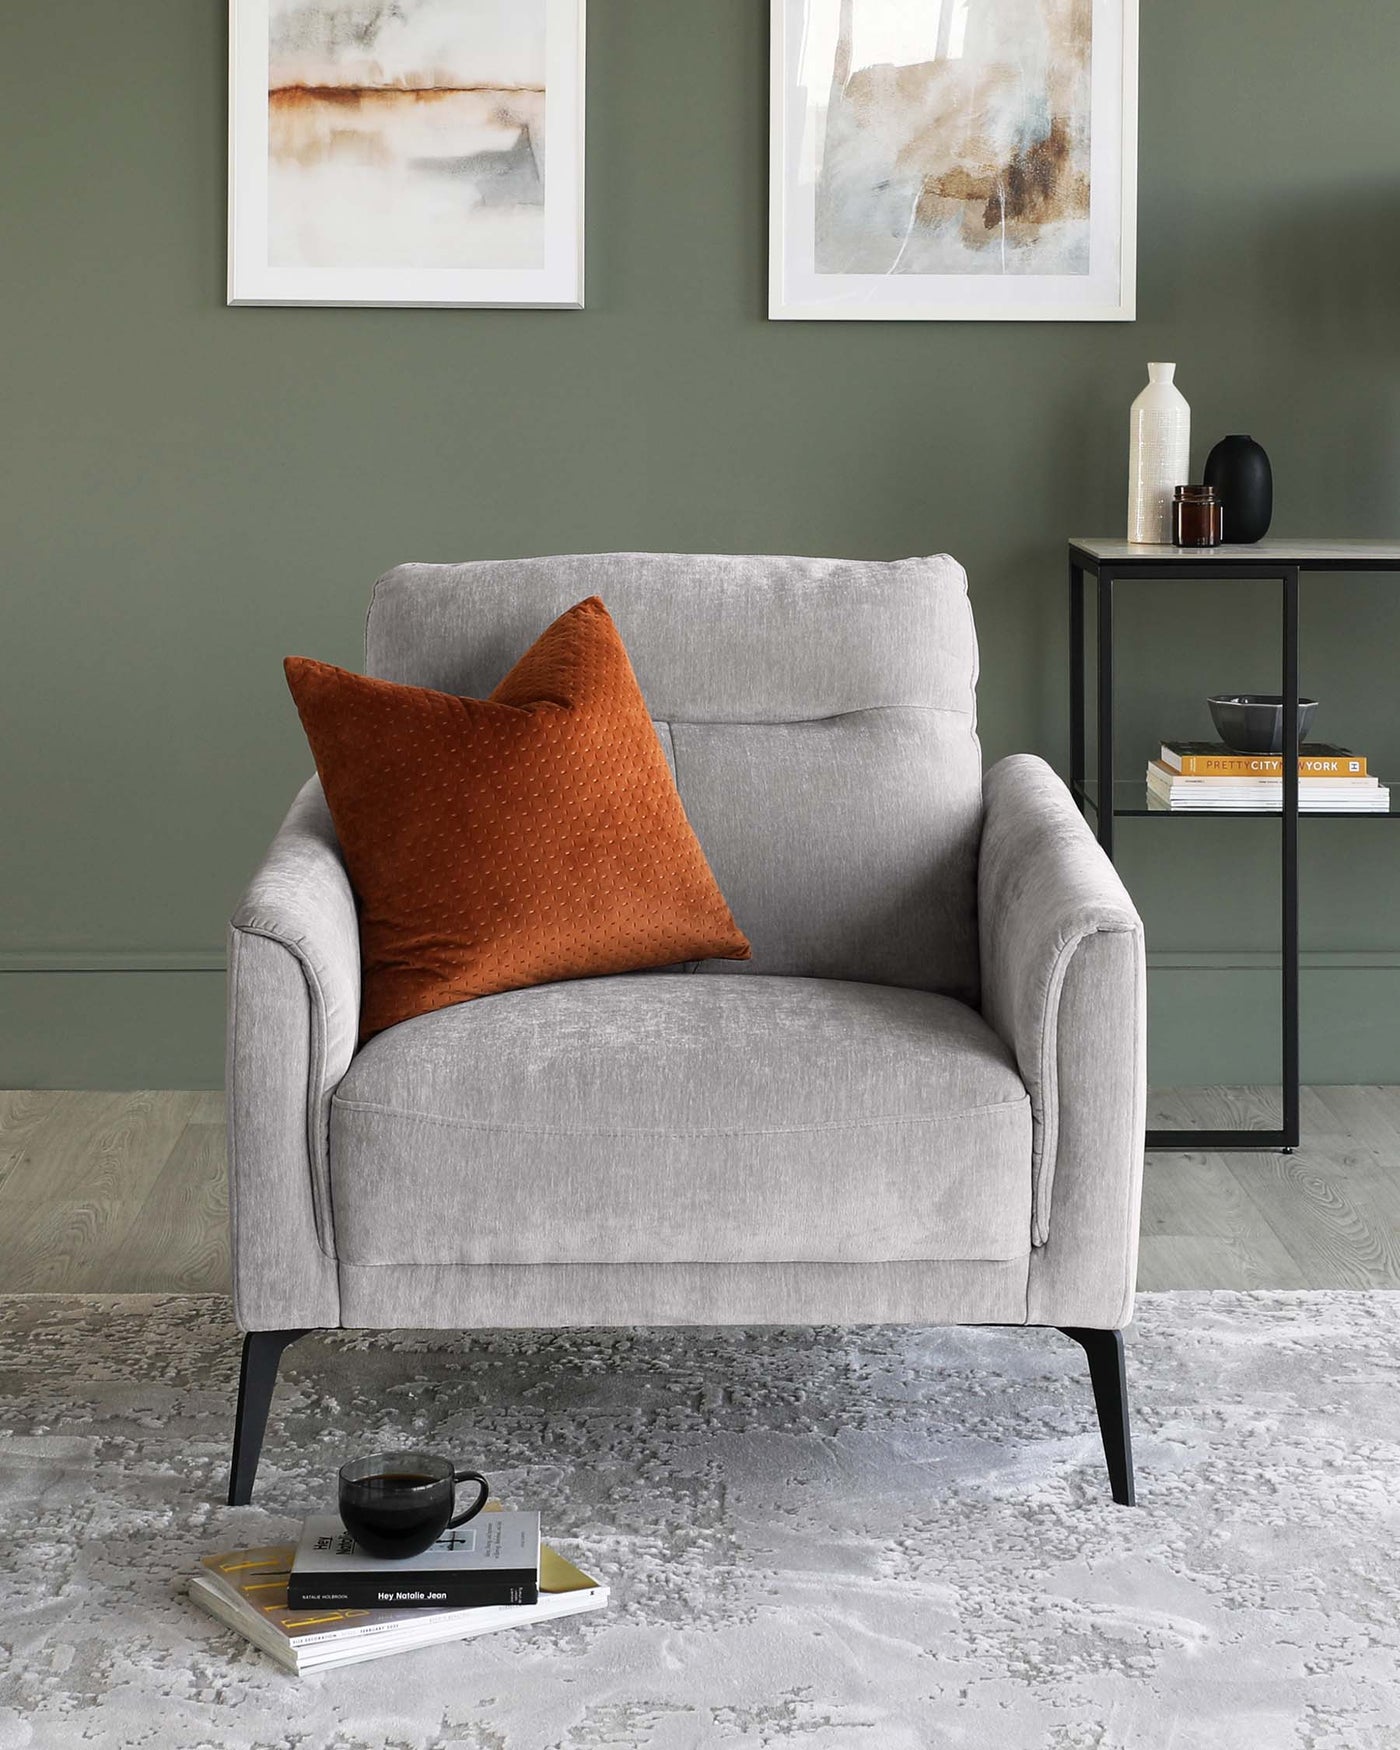 Modern, minimalist-style armchair in light grey fabric with textured rust-coloured accent pillow. The chair has a simple, clean design featuring a high backrest and curved armrests, resting on slender, angled black-metal legs. Beside it is a sleek black-metal side table with a rectangular top, displaying decor items and books. The setup is on a textured light grey area rug over a hardwood floor.